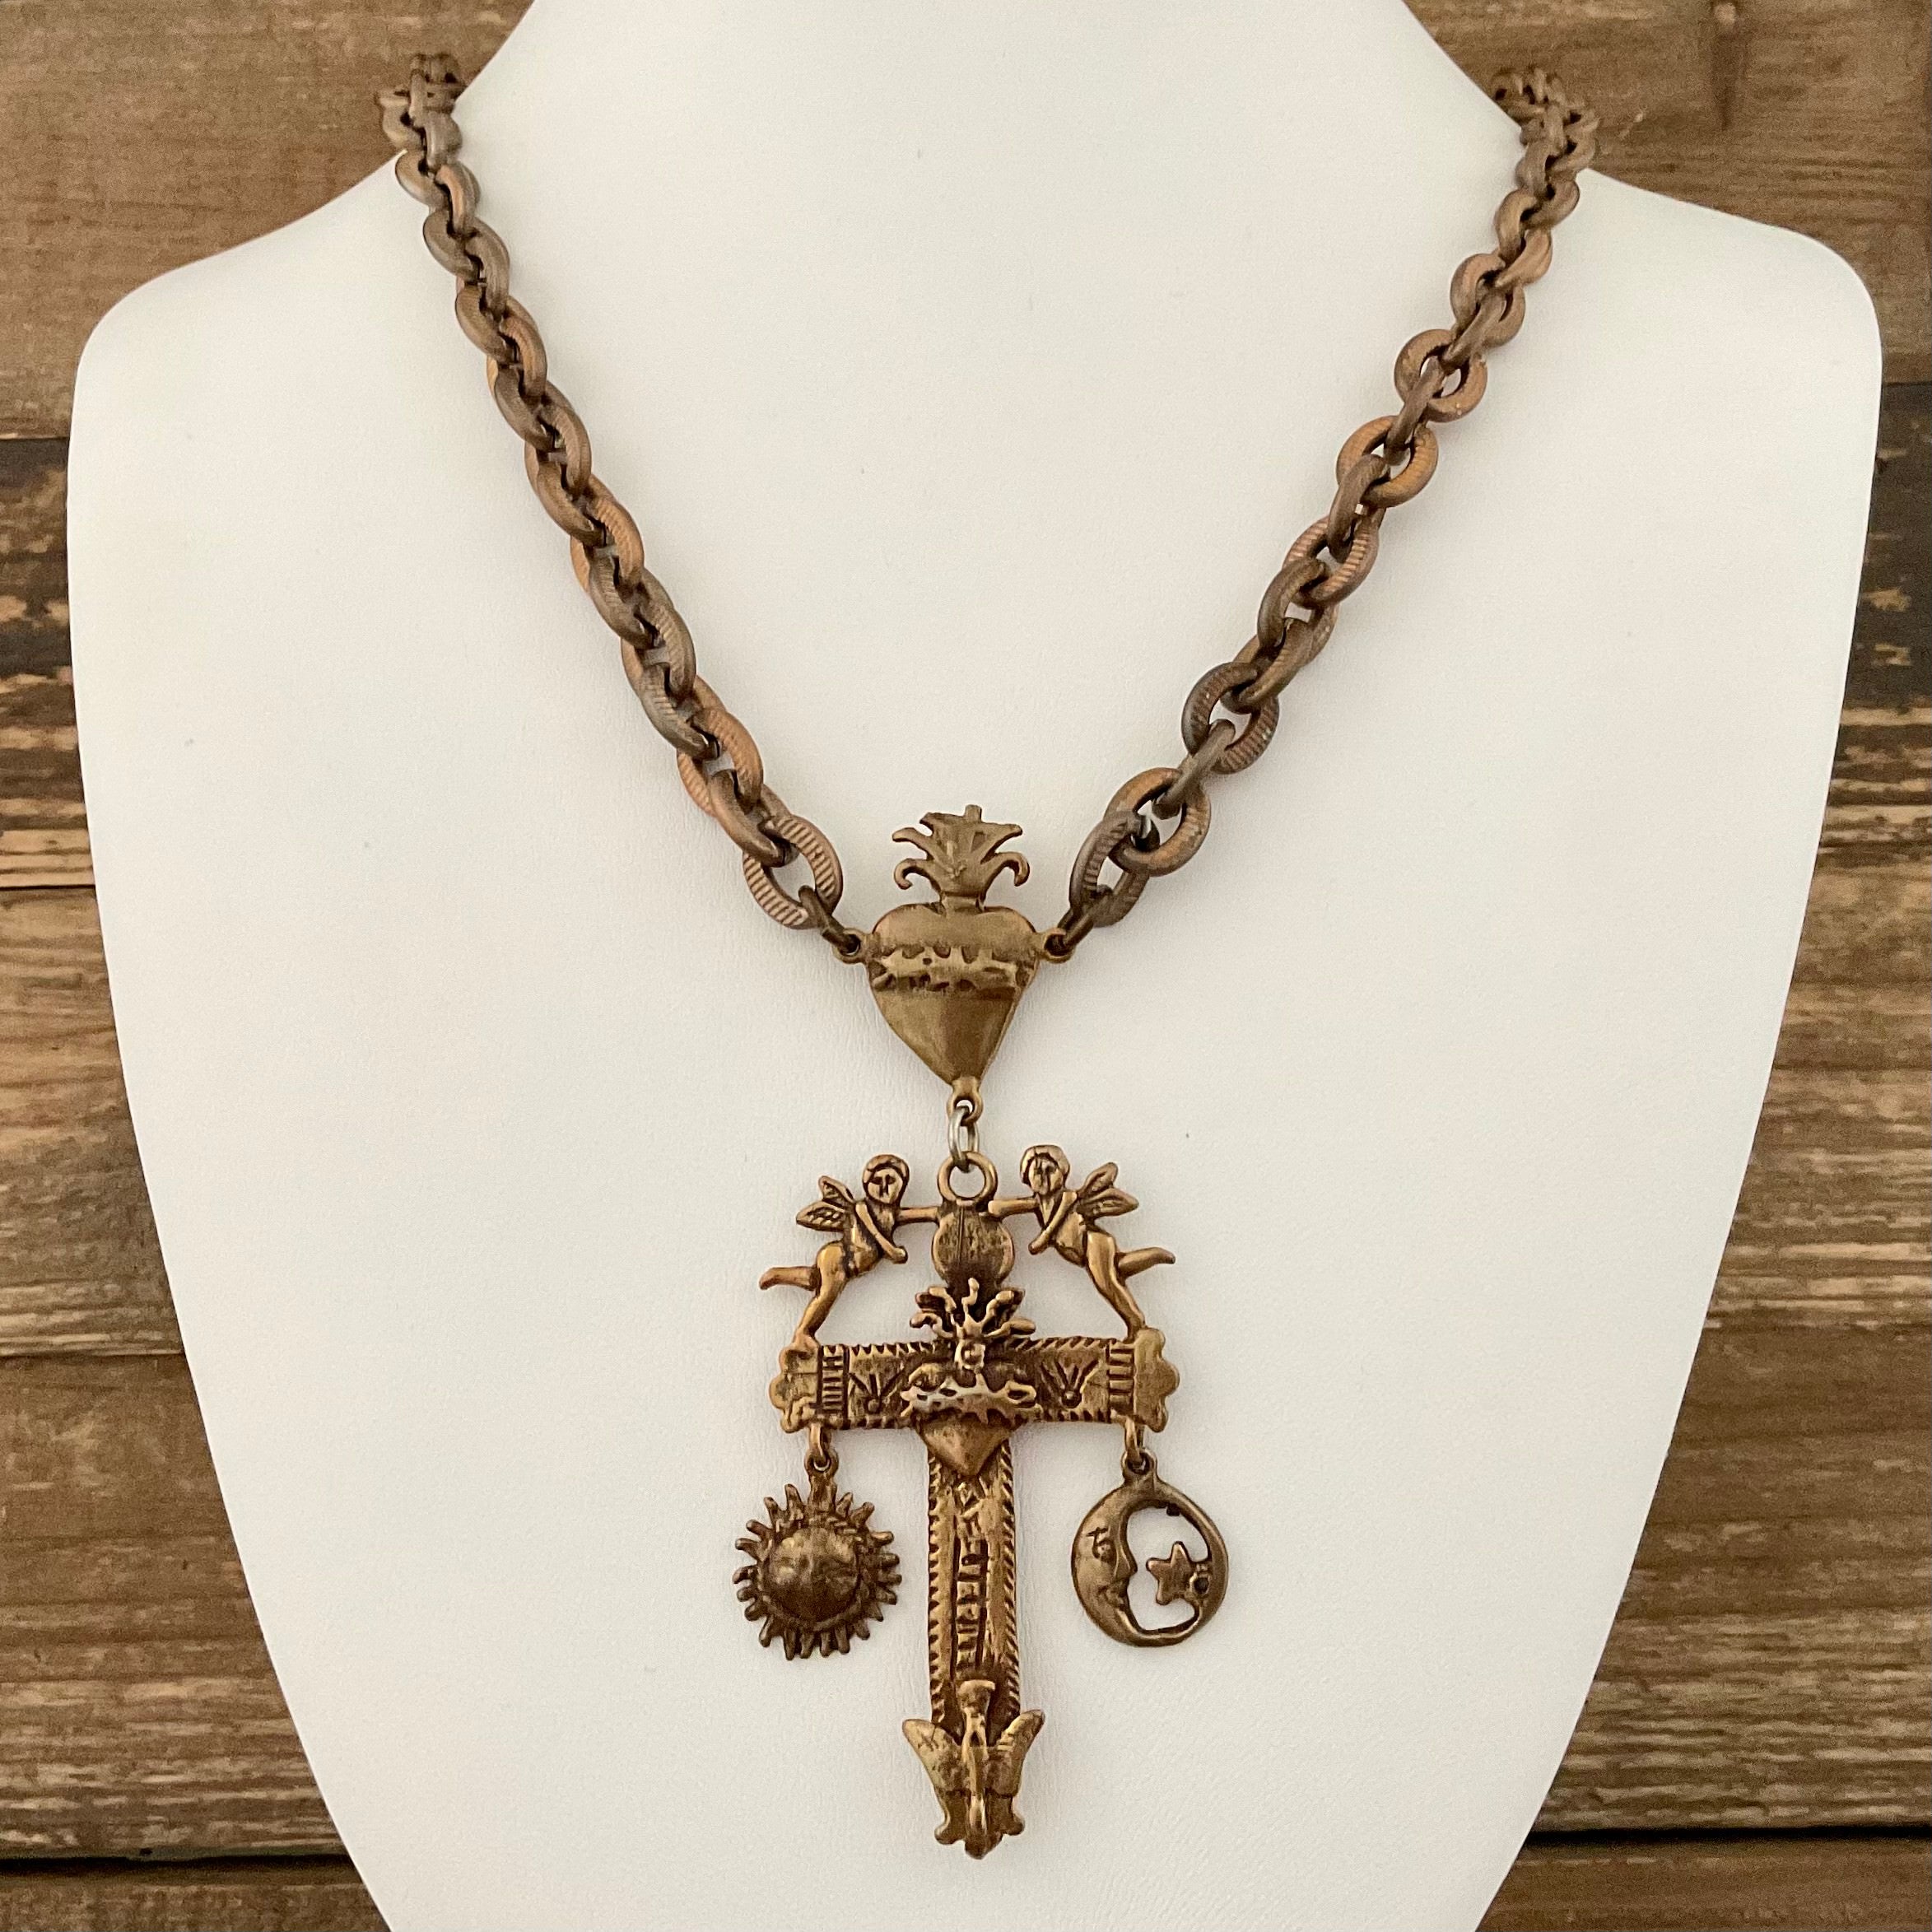 Antique Brass Chain with Cross Reproduction Pendant 18